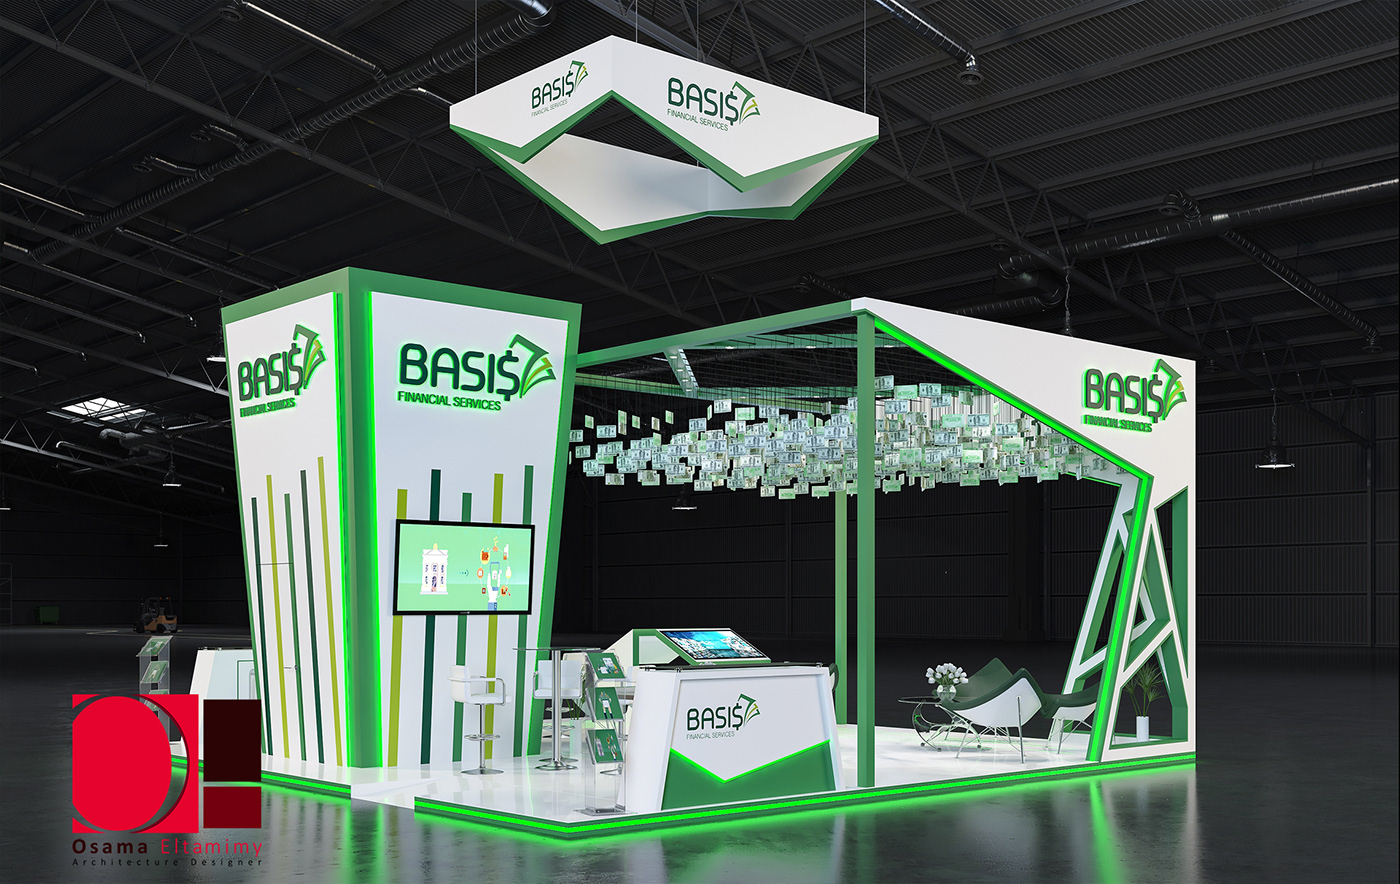 Exhibition  booth Basis financial services